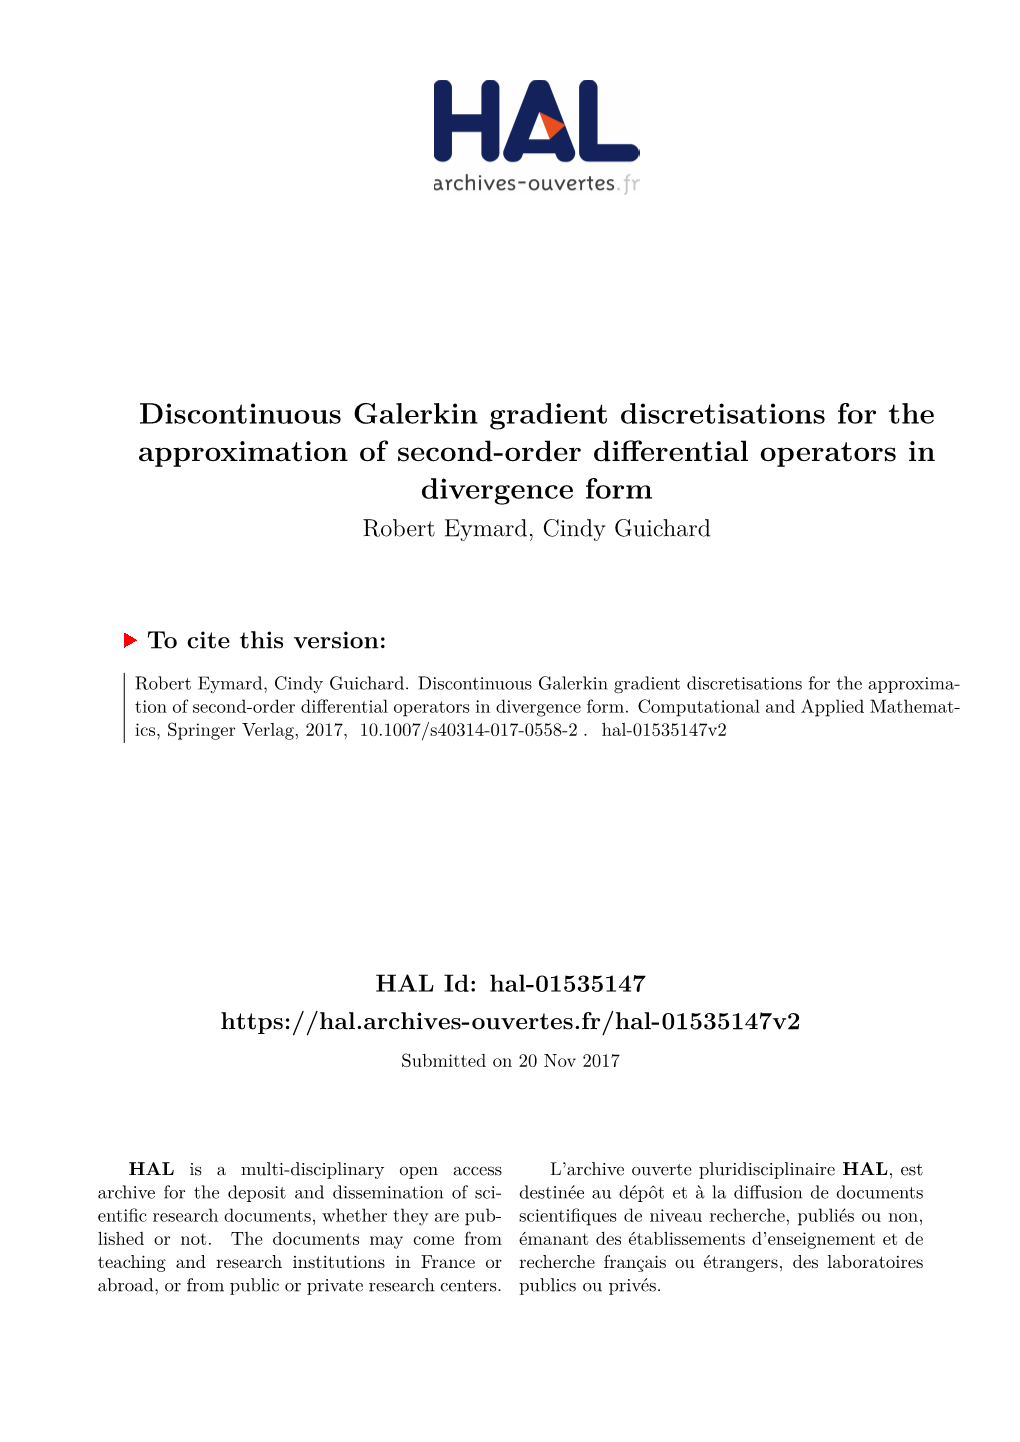 Discontinuous Galerkin Gradient Discretisations for the Approximation of Second-Order Differential Operators in Divergence Form Robert Eymard, Cindy Guichard